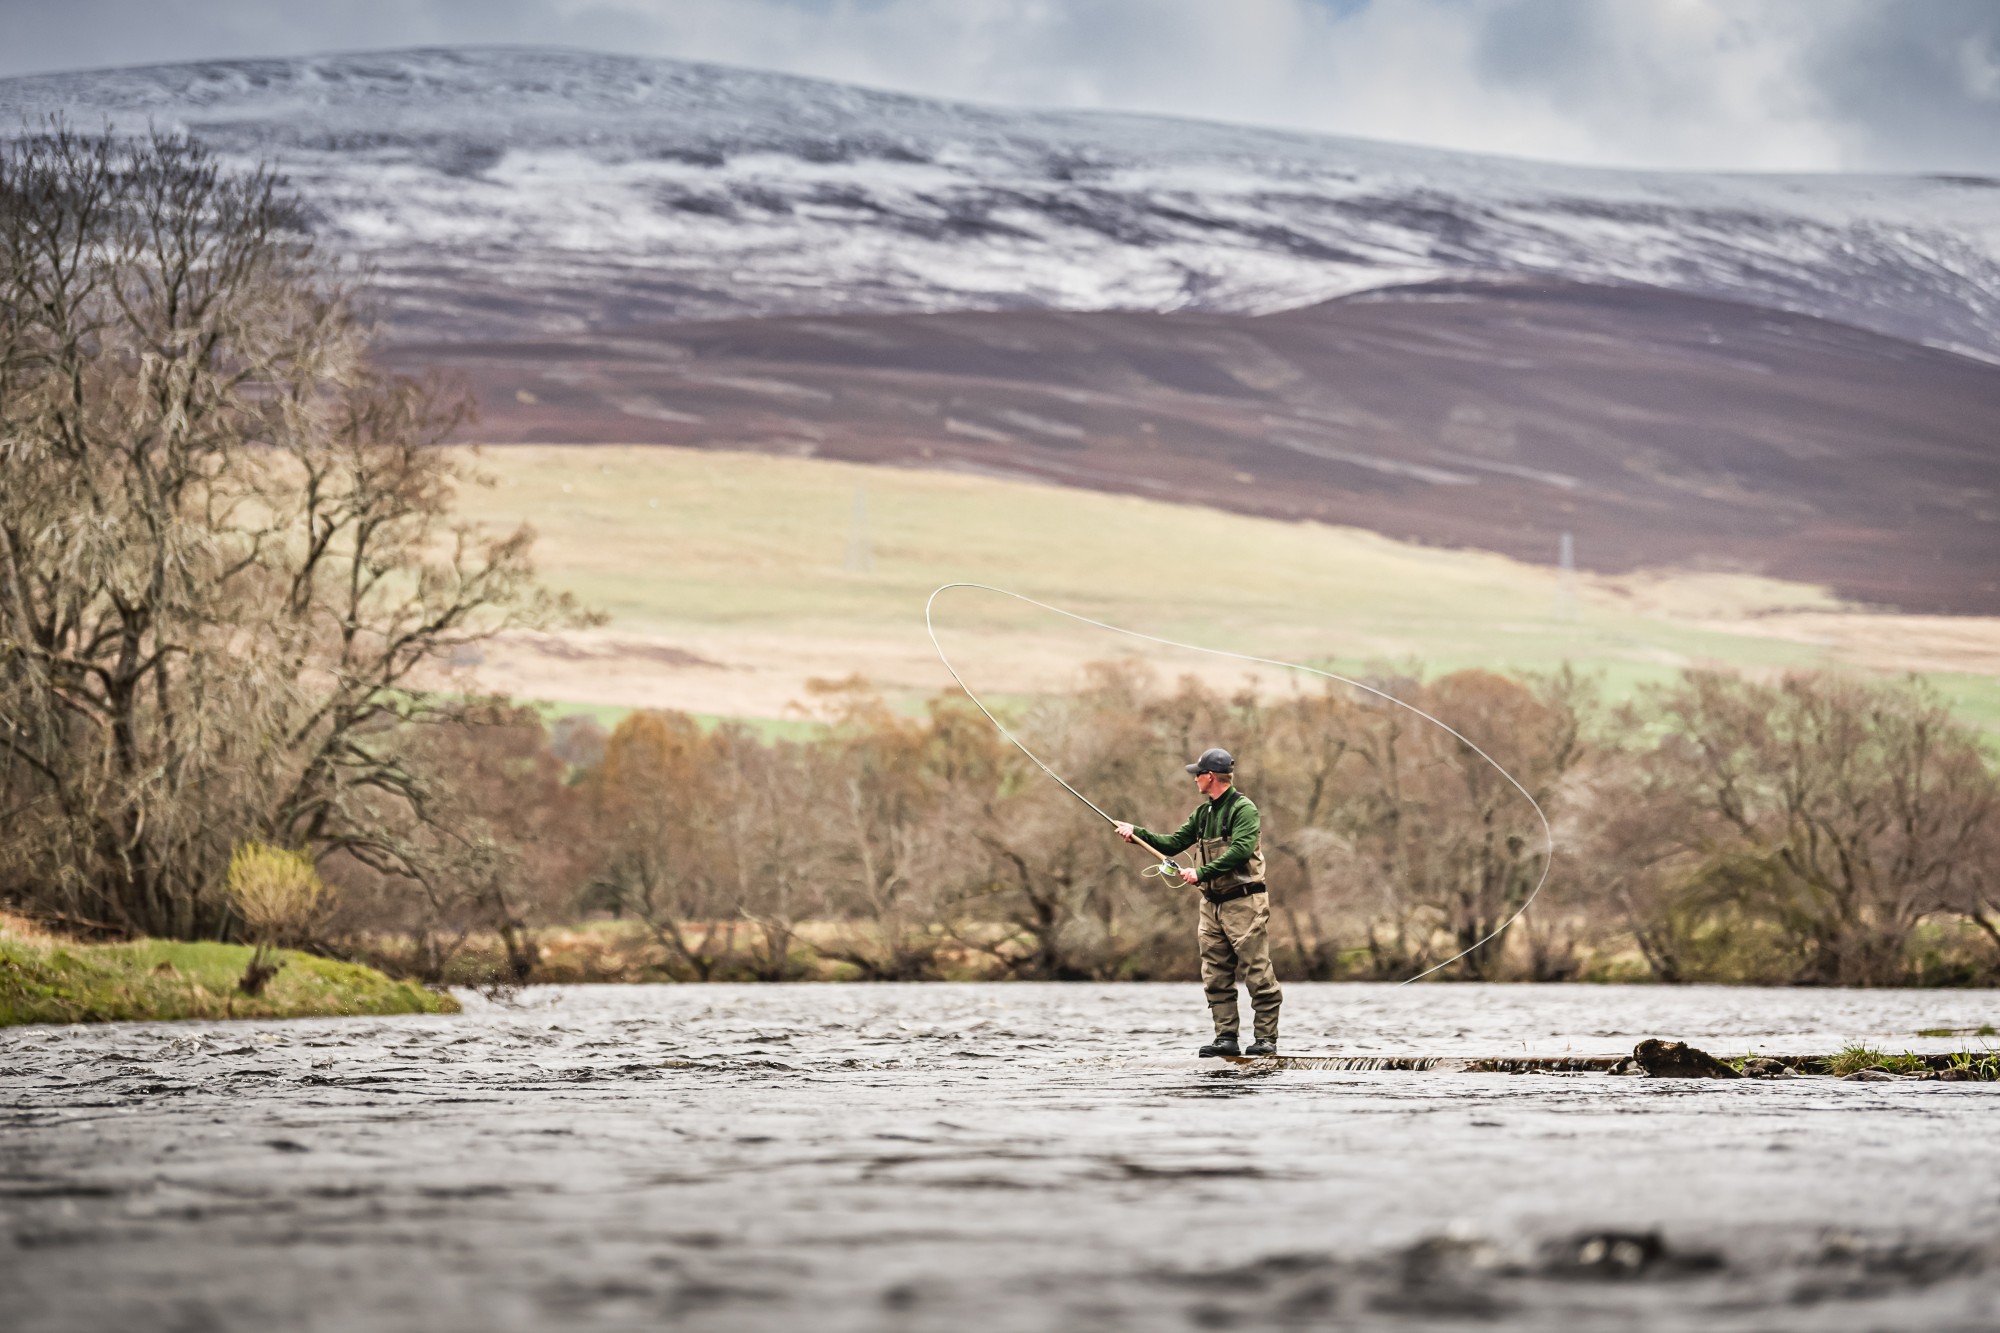 Salmon fishing on the River Spey in Scotland! Fly fishing is a niche sport  but one I really recommend, mostly because it gives you a reas